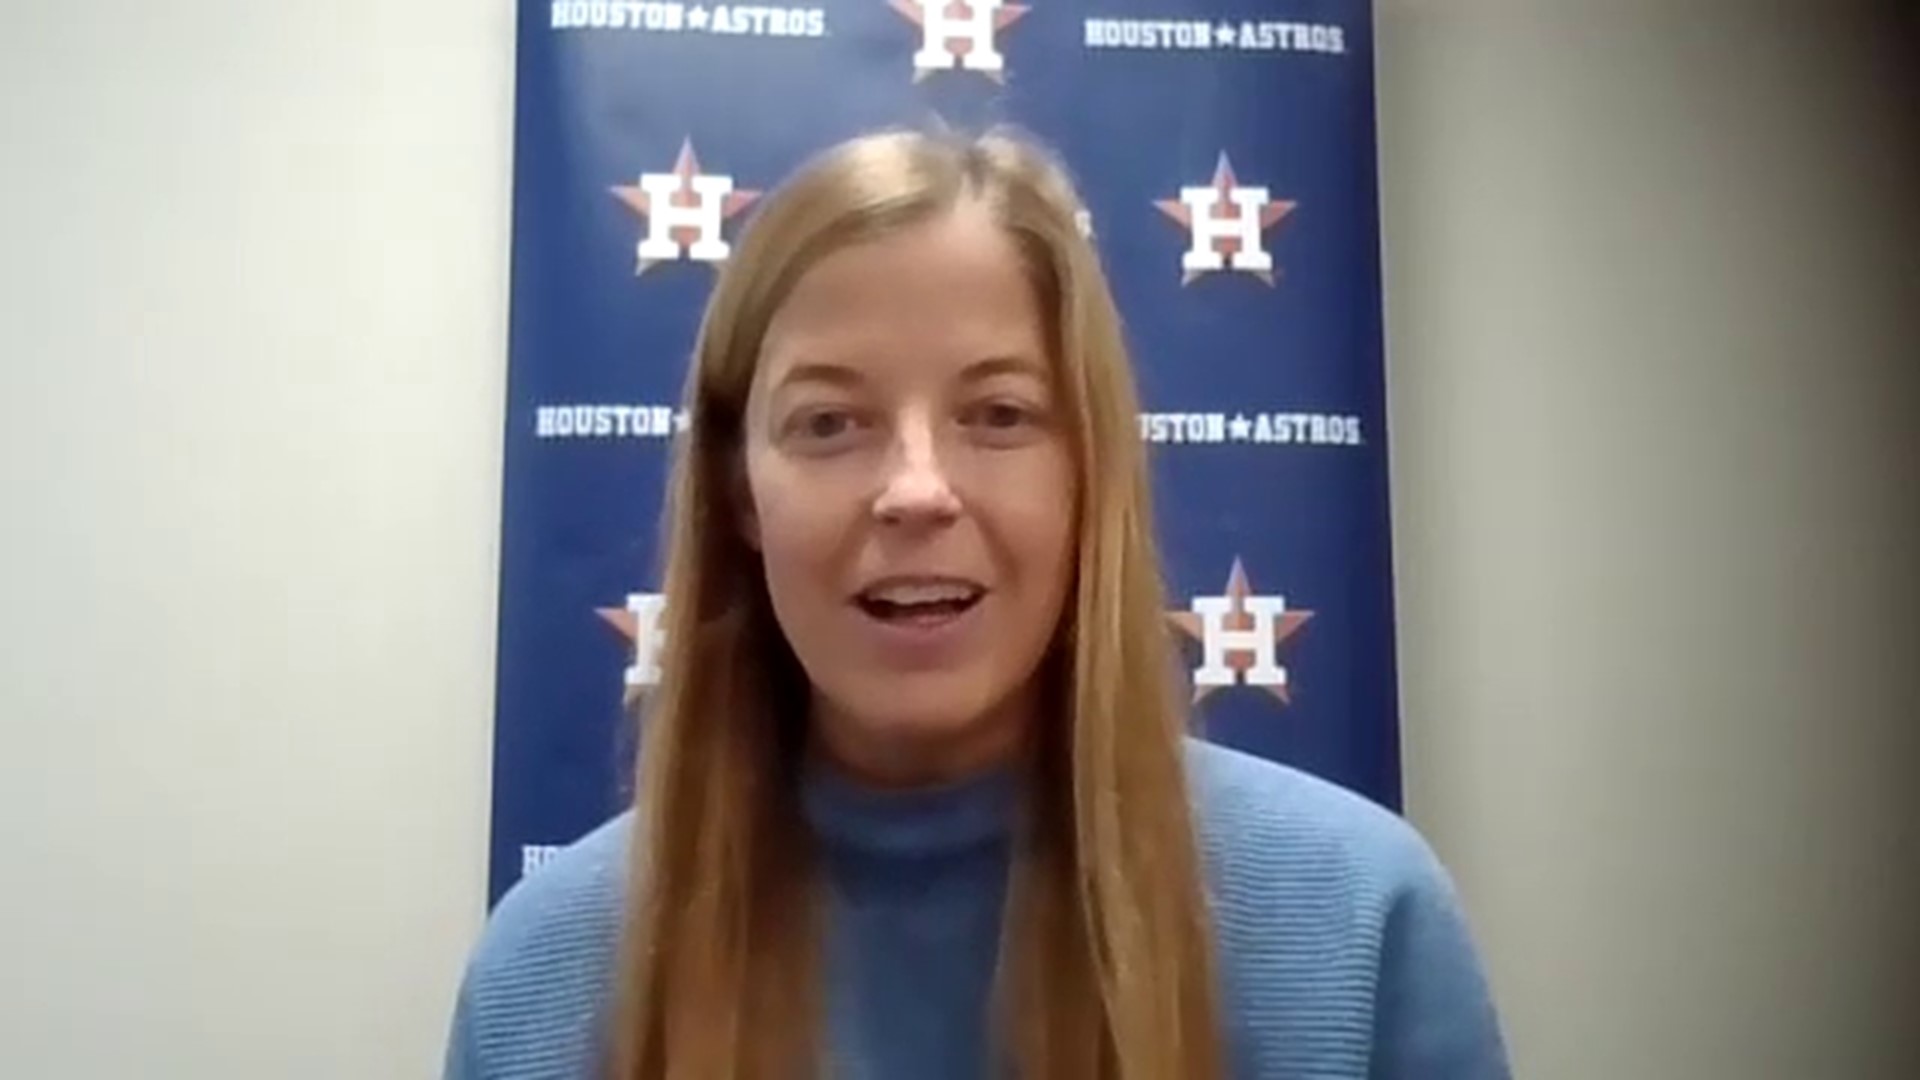 Goodrum will help oversee the Houston Astros' minor league system, making her one of the highest-ranking women in the game.